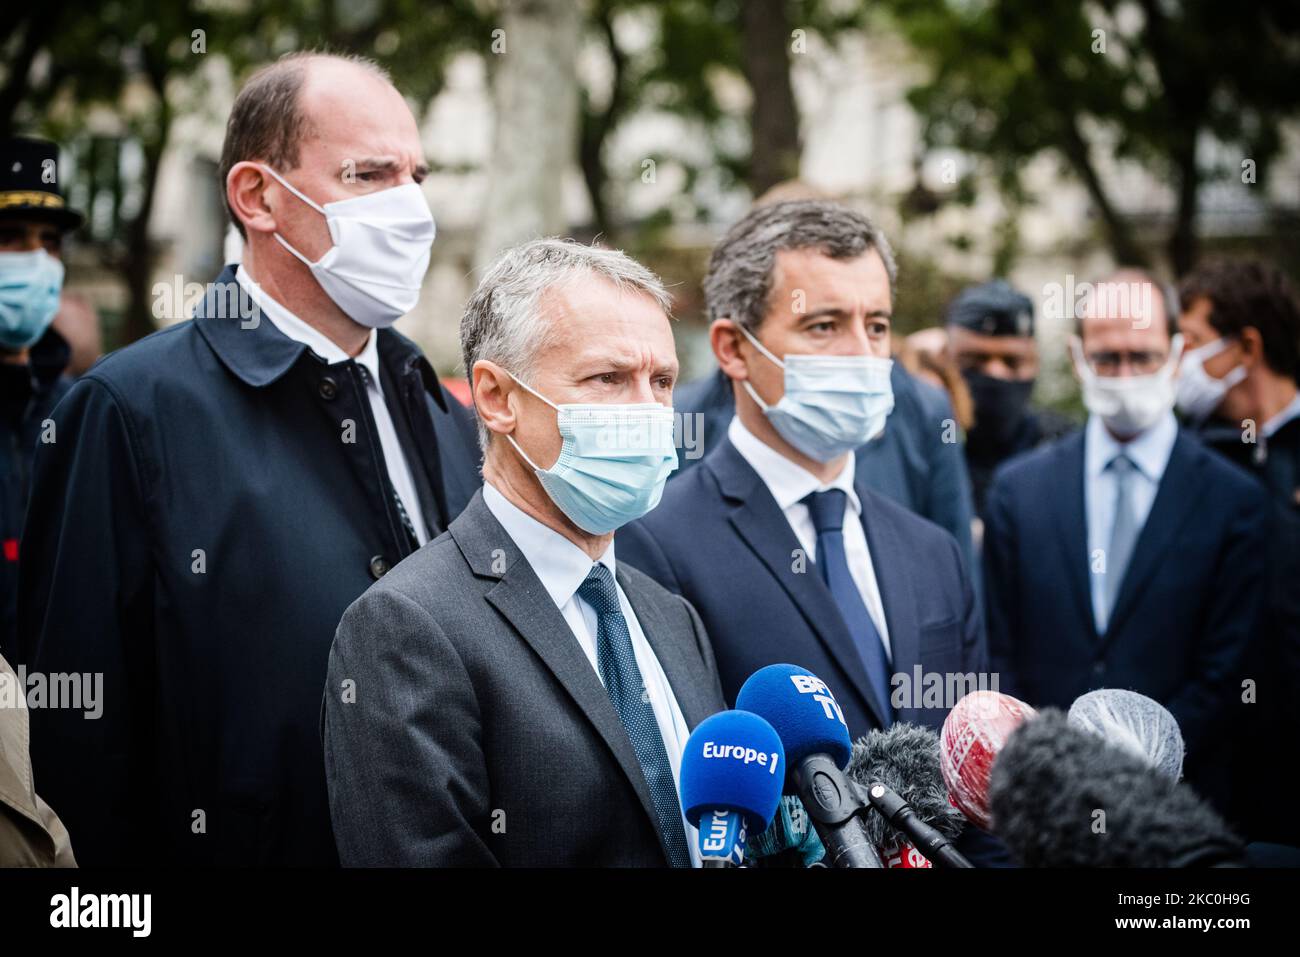 Jean-François Ricard, anti-terrorist prosecutor, Prime Minister Jean Castex and Interior Minister Gérald Darmanin at a press conference in Paris, France, on September 25, 2020, when shortly before noon a man armed with a knife or machete attacked people in the rue Nicolas Appart in the 11th arrondissement of Paris where the former premises of the newspaper Charlie Hebdo are located and where the attacks of January 7, 2015 against the newspaper's editorial staff took place, leaving two people injured. The perpetrator of the attack was arrested along with a second man, and a security perimeter w Stock Photo